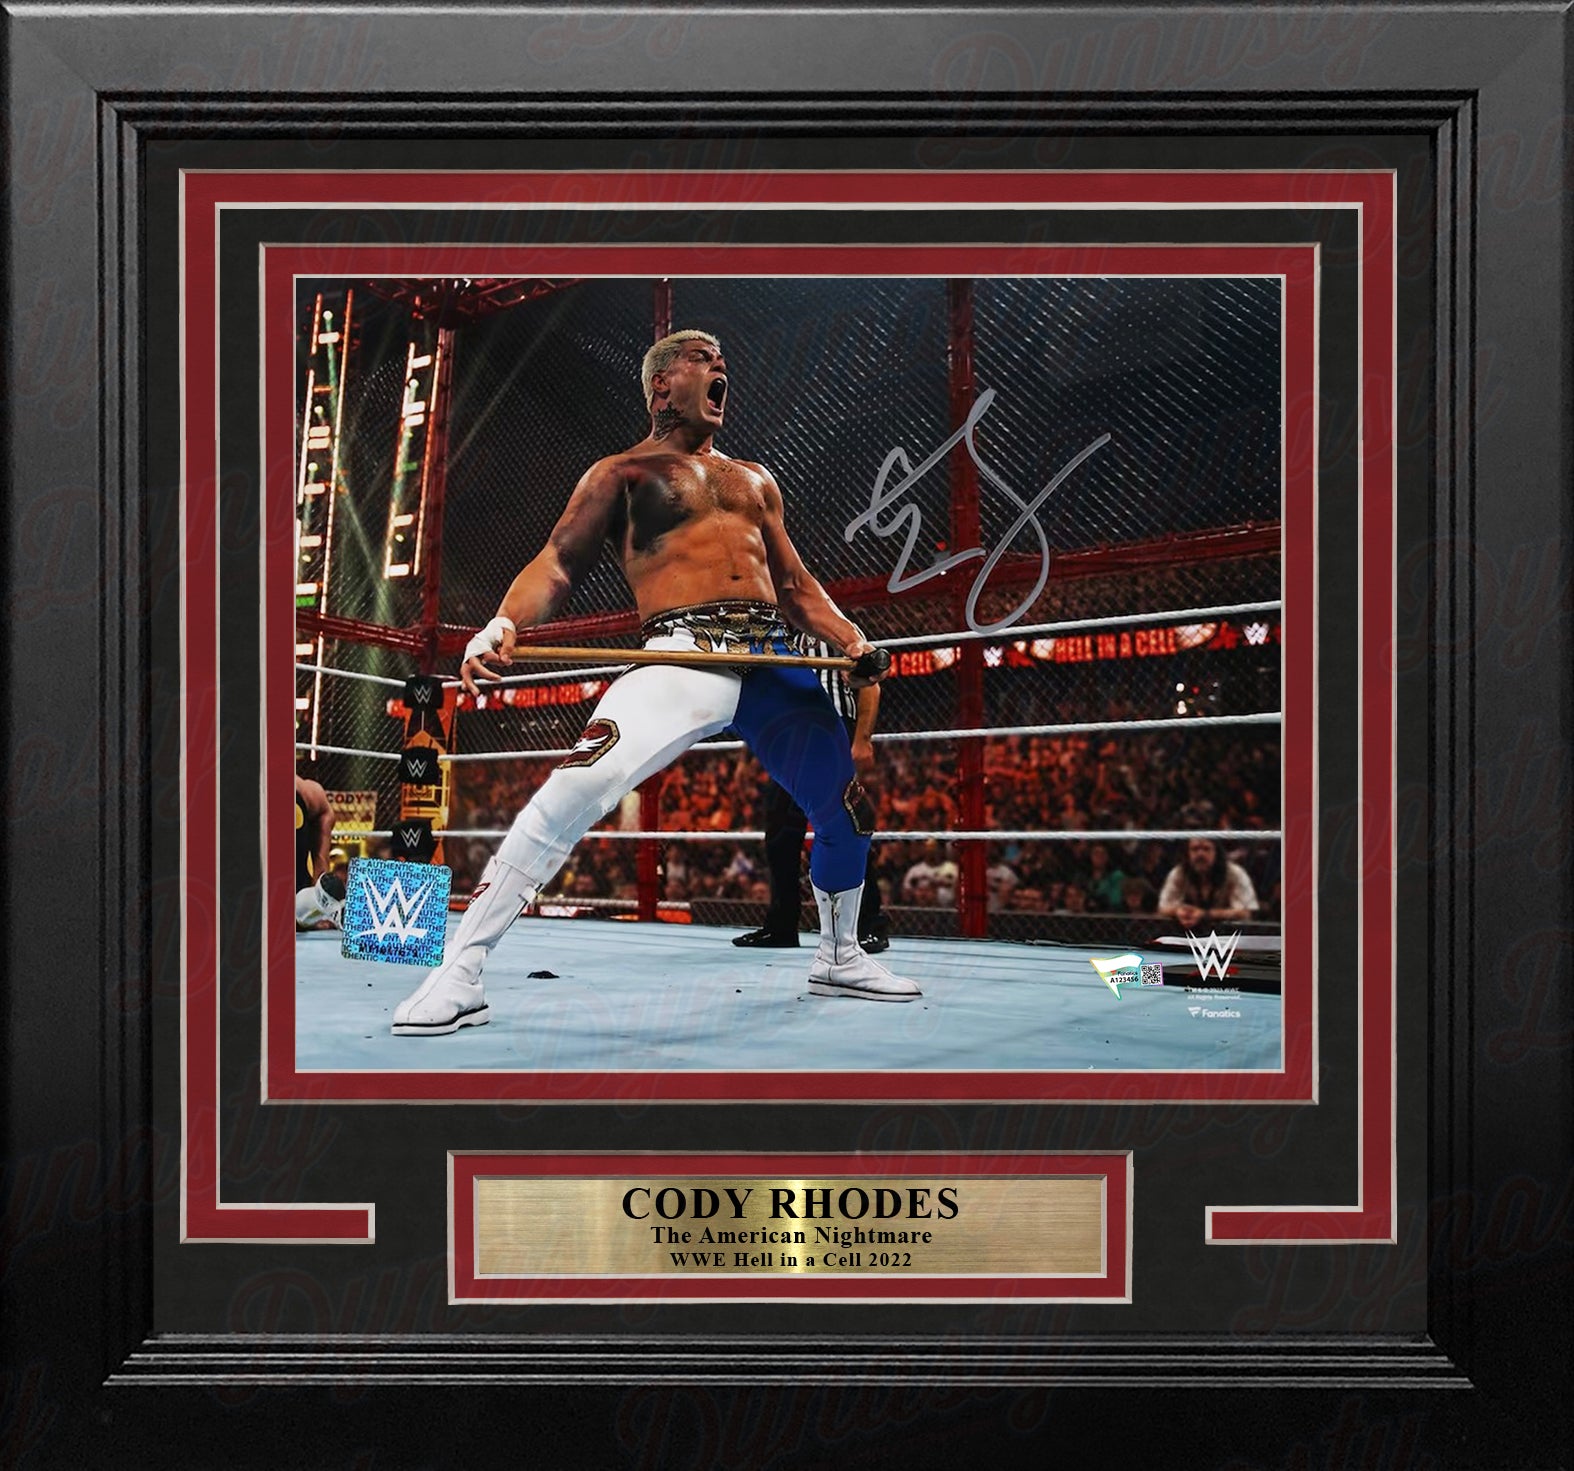 Cody Rhodes Hell in a Cell with a Sledgehammer Autographed 8" x 10" Framed Wrestling Photo - Dynasty Sports & Framing 